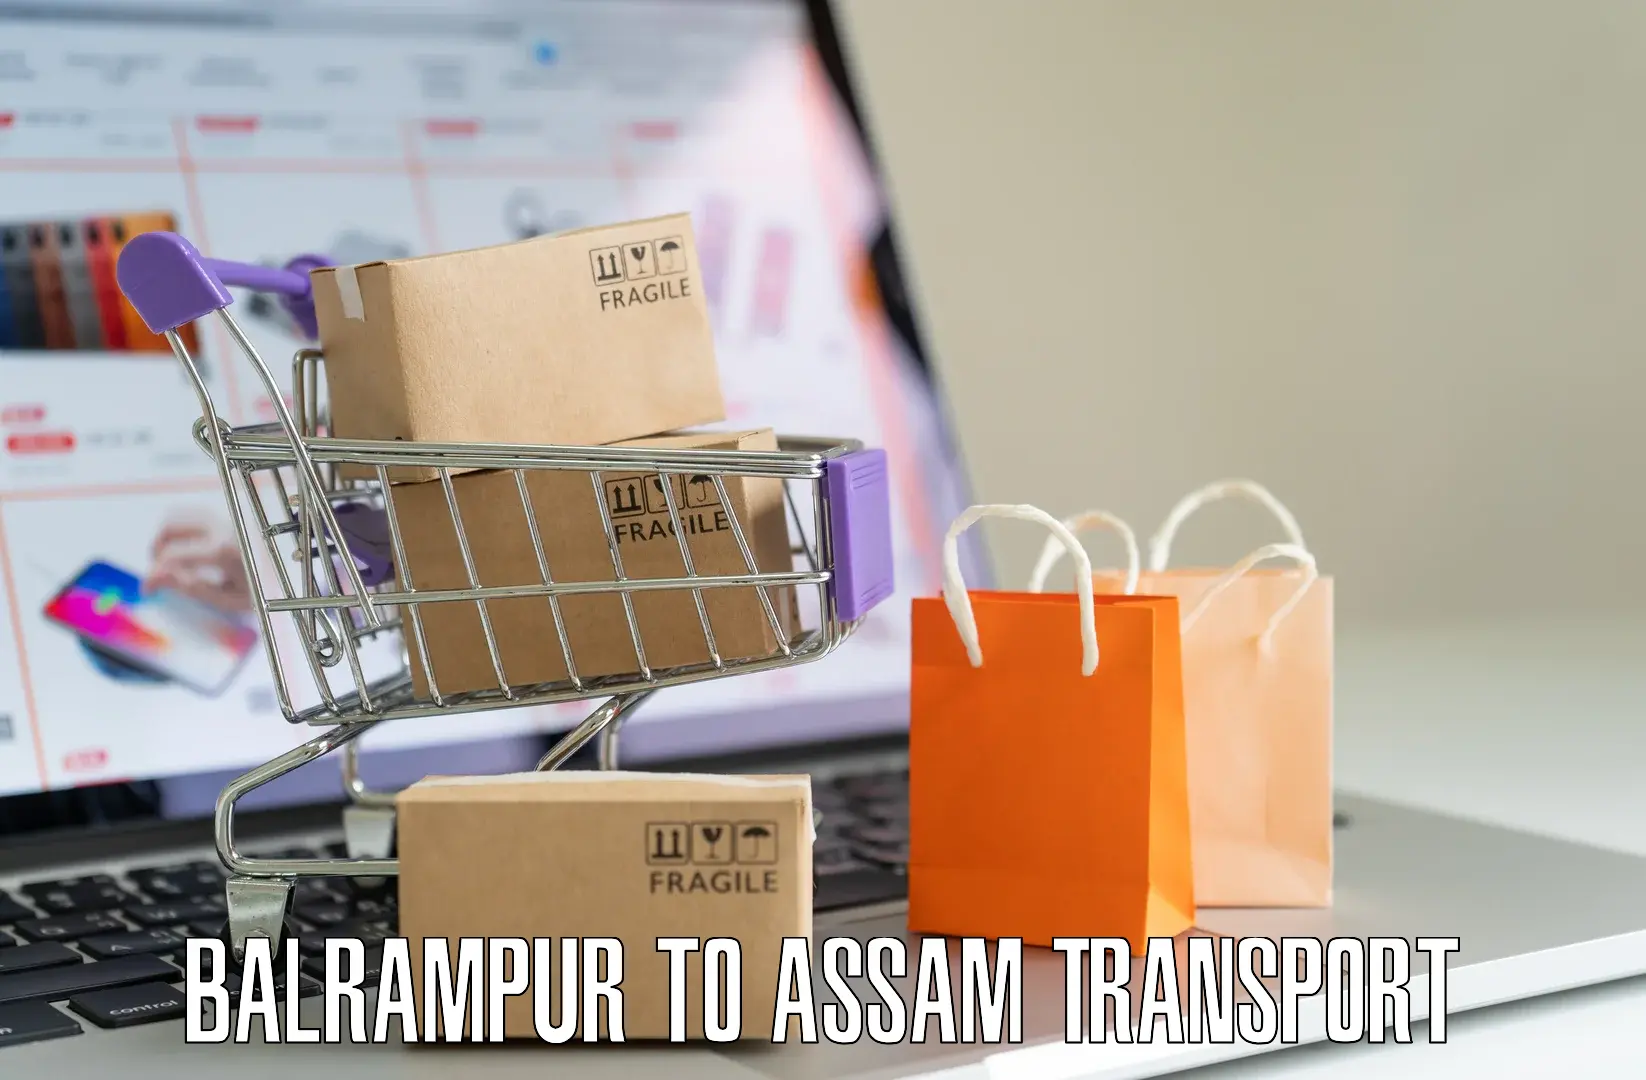 Commercial transport service Balrampur to Assam